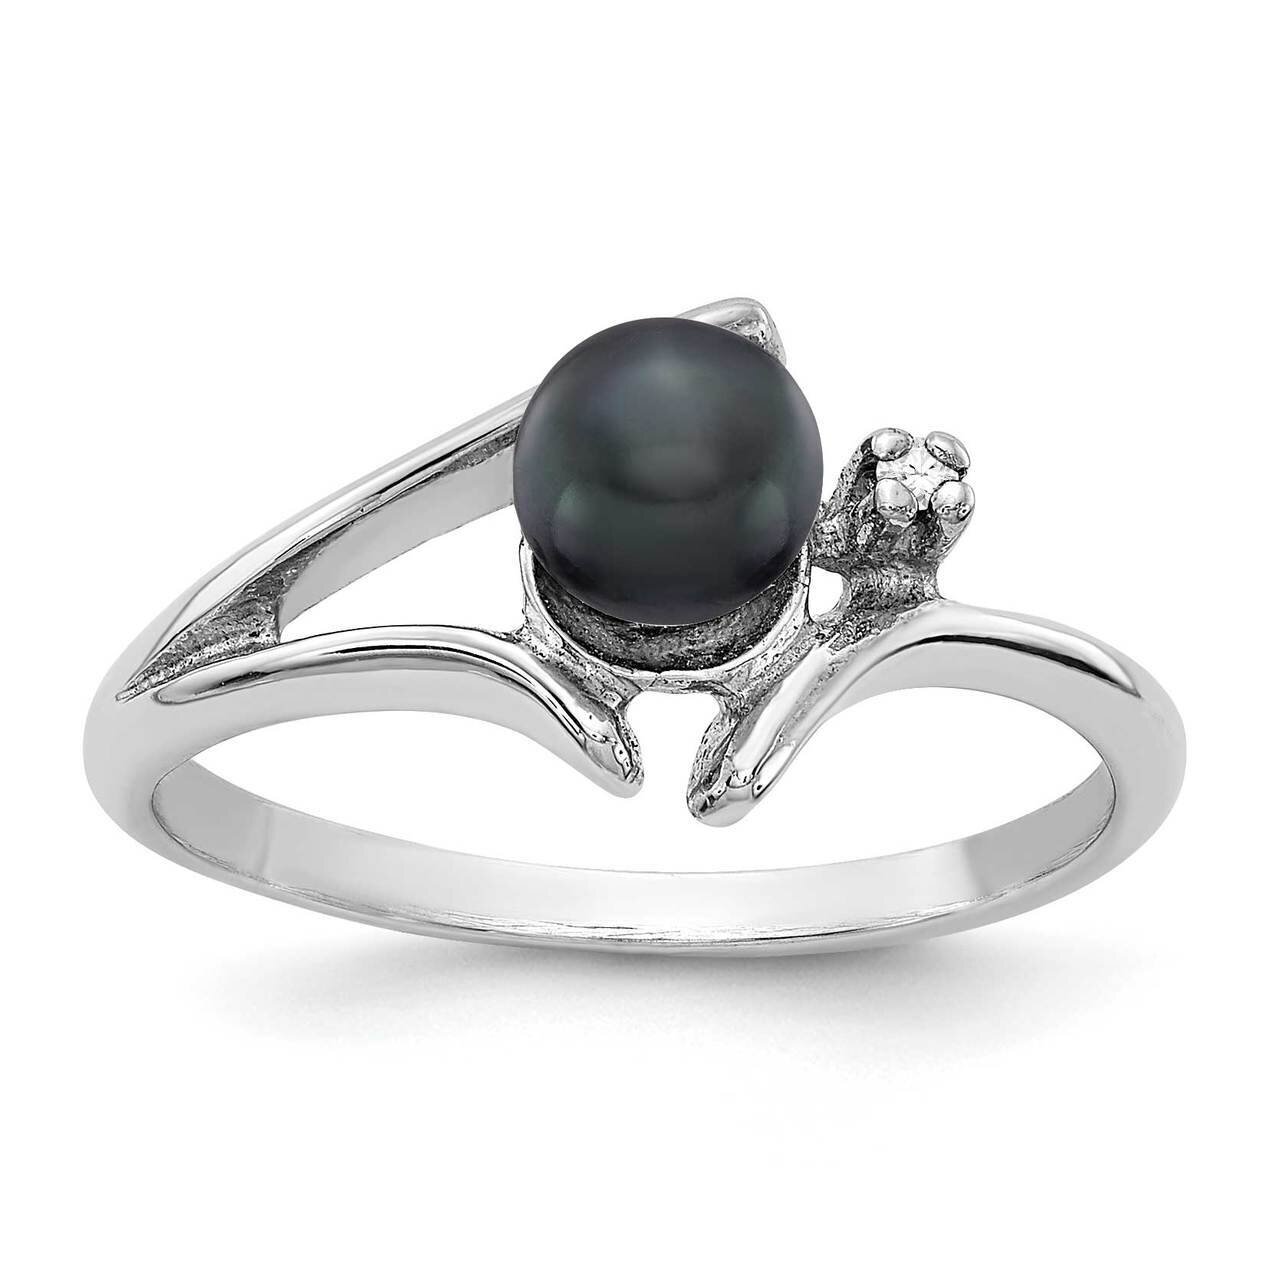 5mm Black Freshwater Cultured Pearl Diamond Ring 14k White Gold Y1947BP_AA